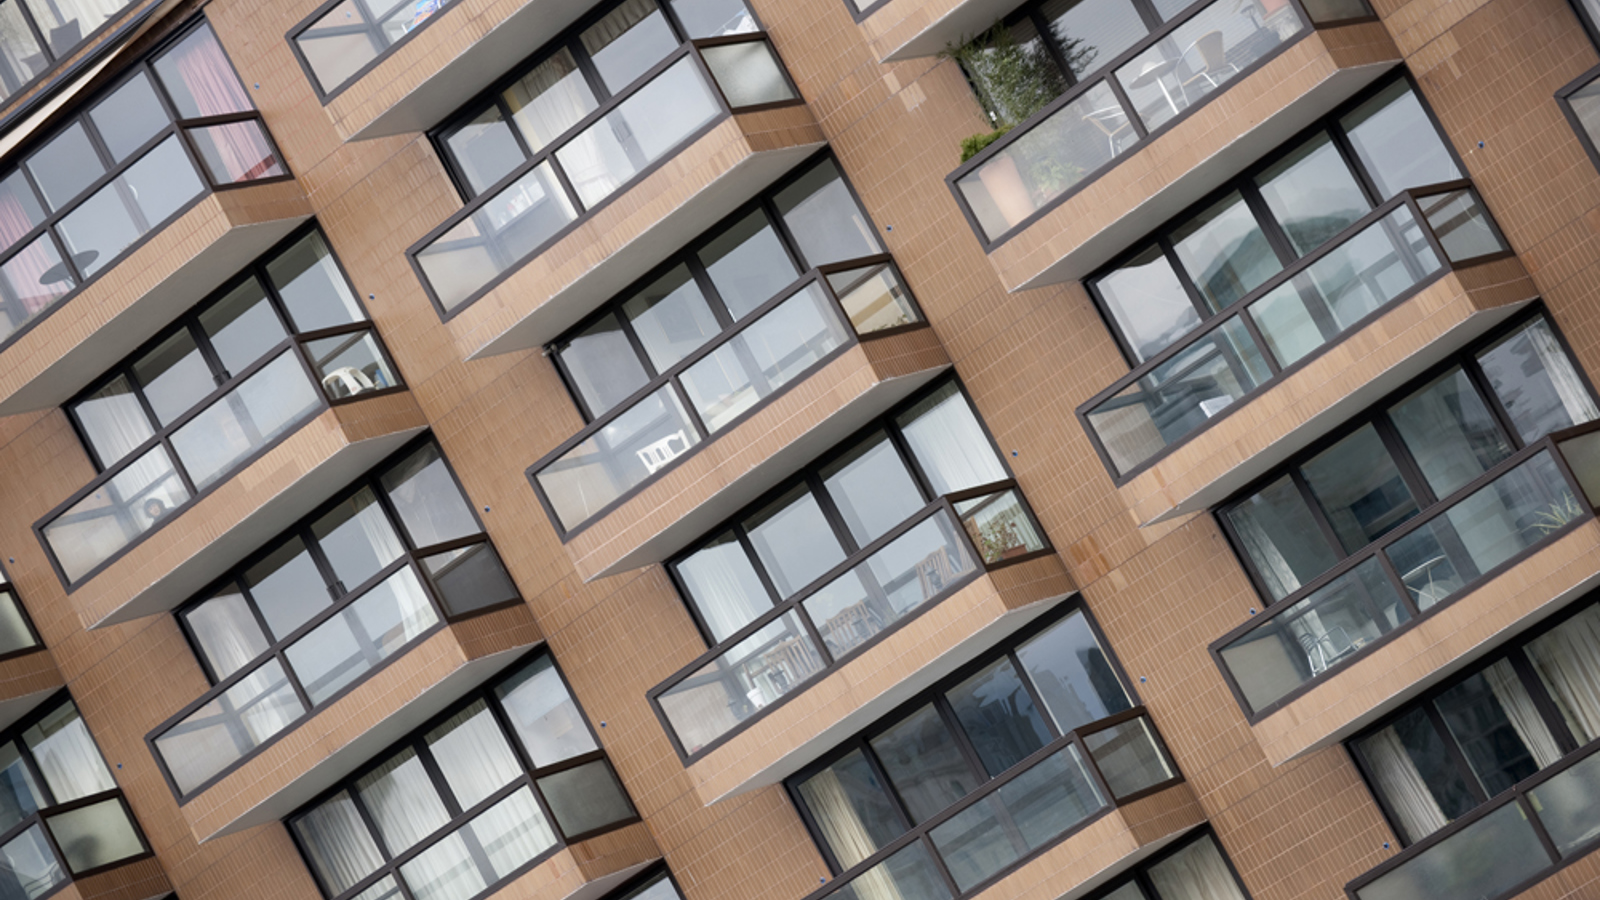 A tilted image capturing the balconies of an apartment building